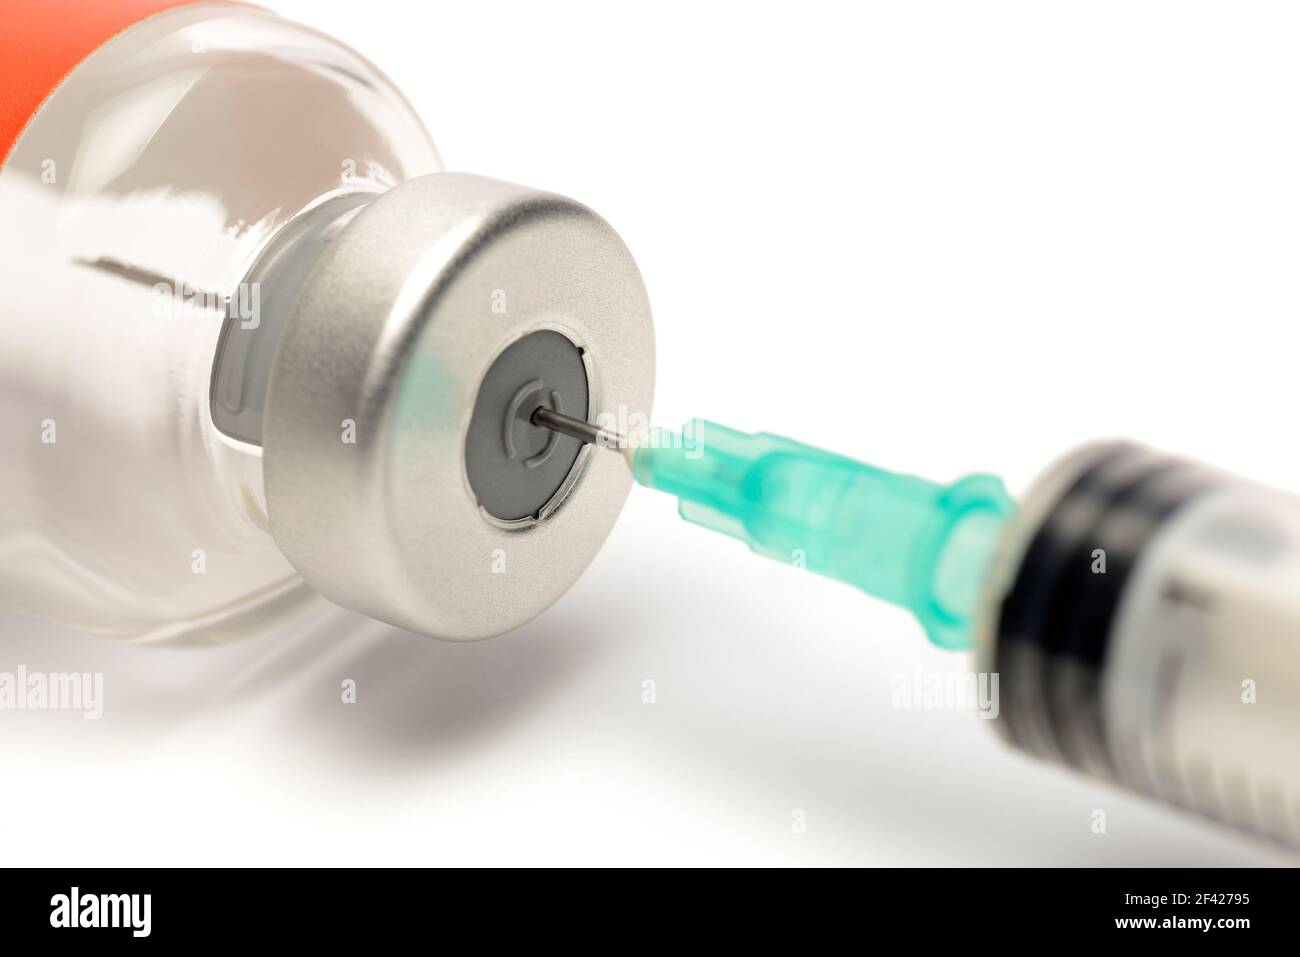 Syringe in a Glass Vial Preparing for an Injection Stock Photo